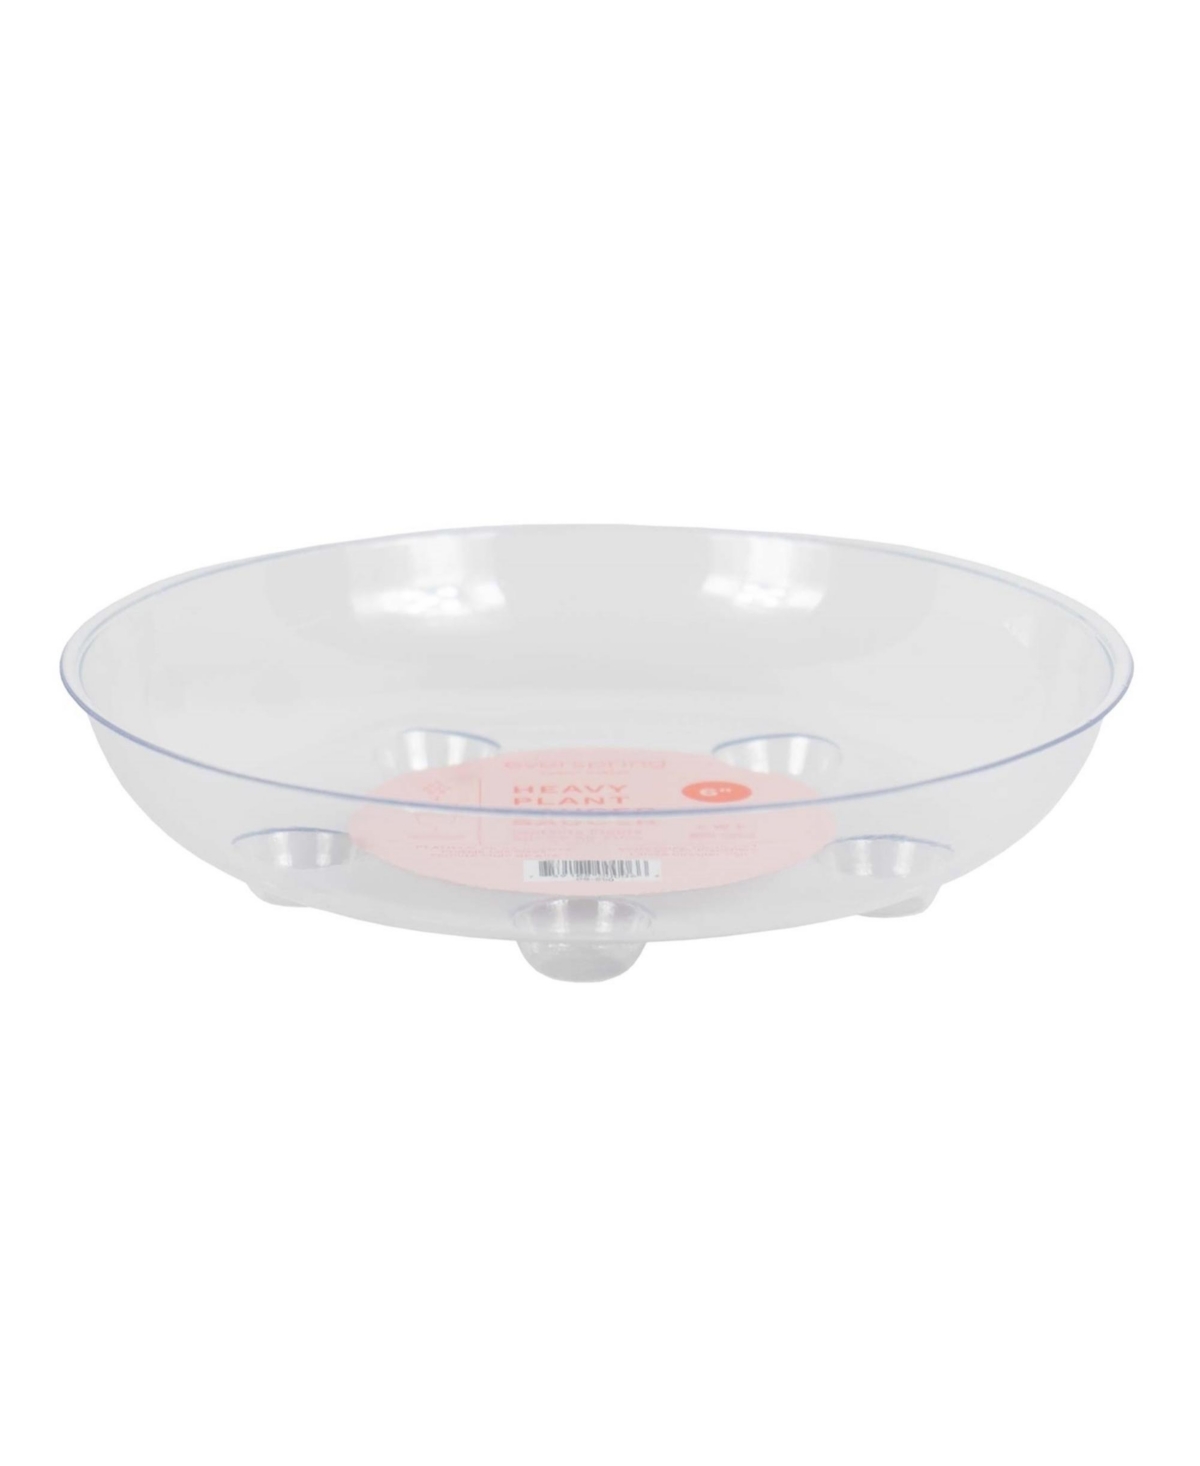 Heavy Gauge Footed Carpet Saver Saucer, 6-Inch Diameter, Clear - Clear